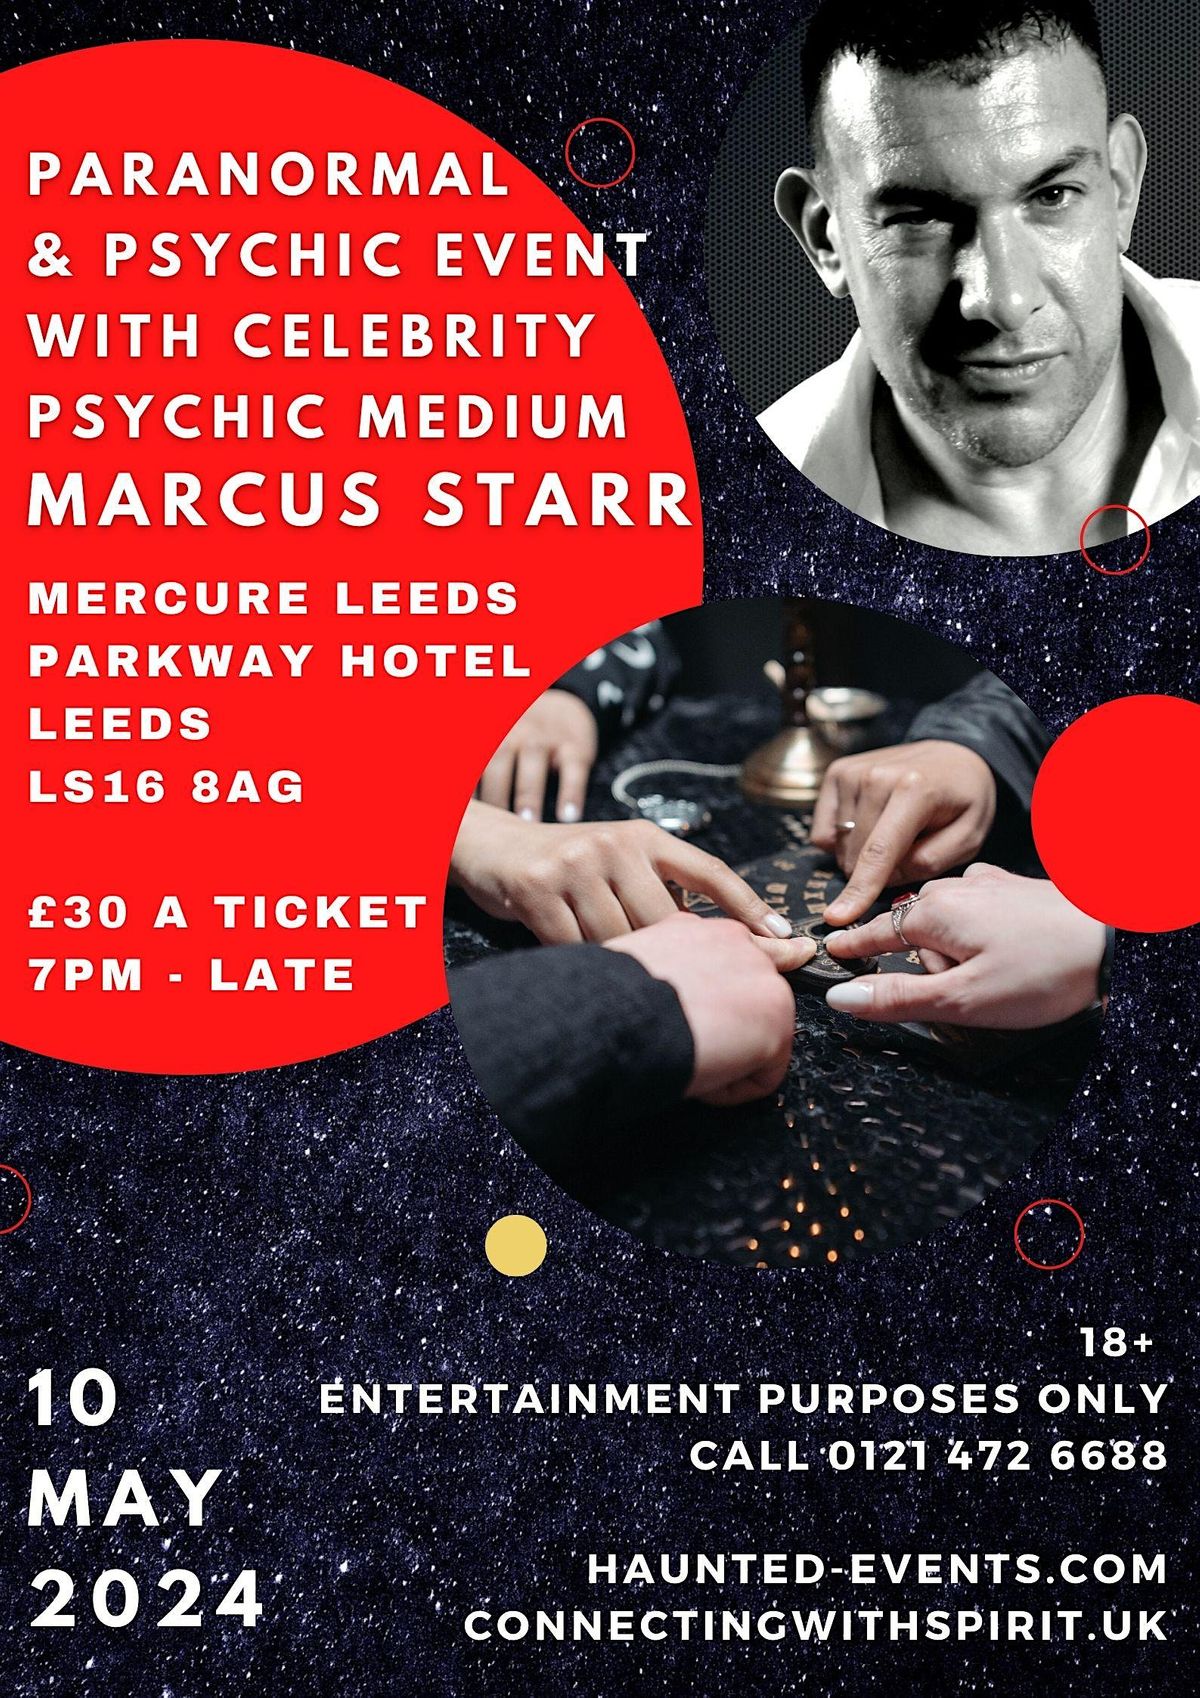 Paranormal & Mediumship with Celebrity Psychic Marcus Starr @ Mercure Leeds